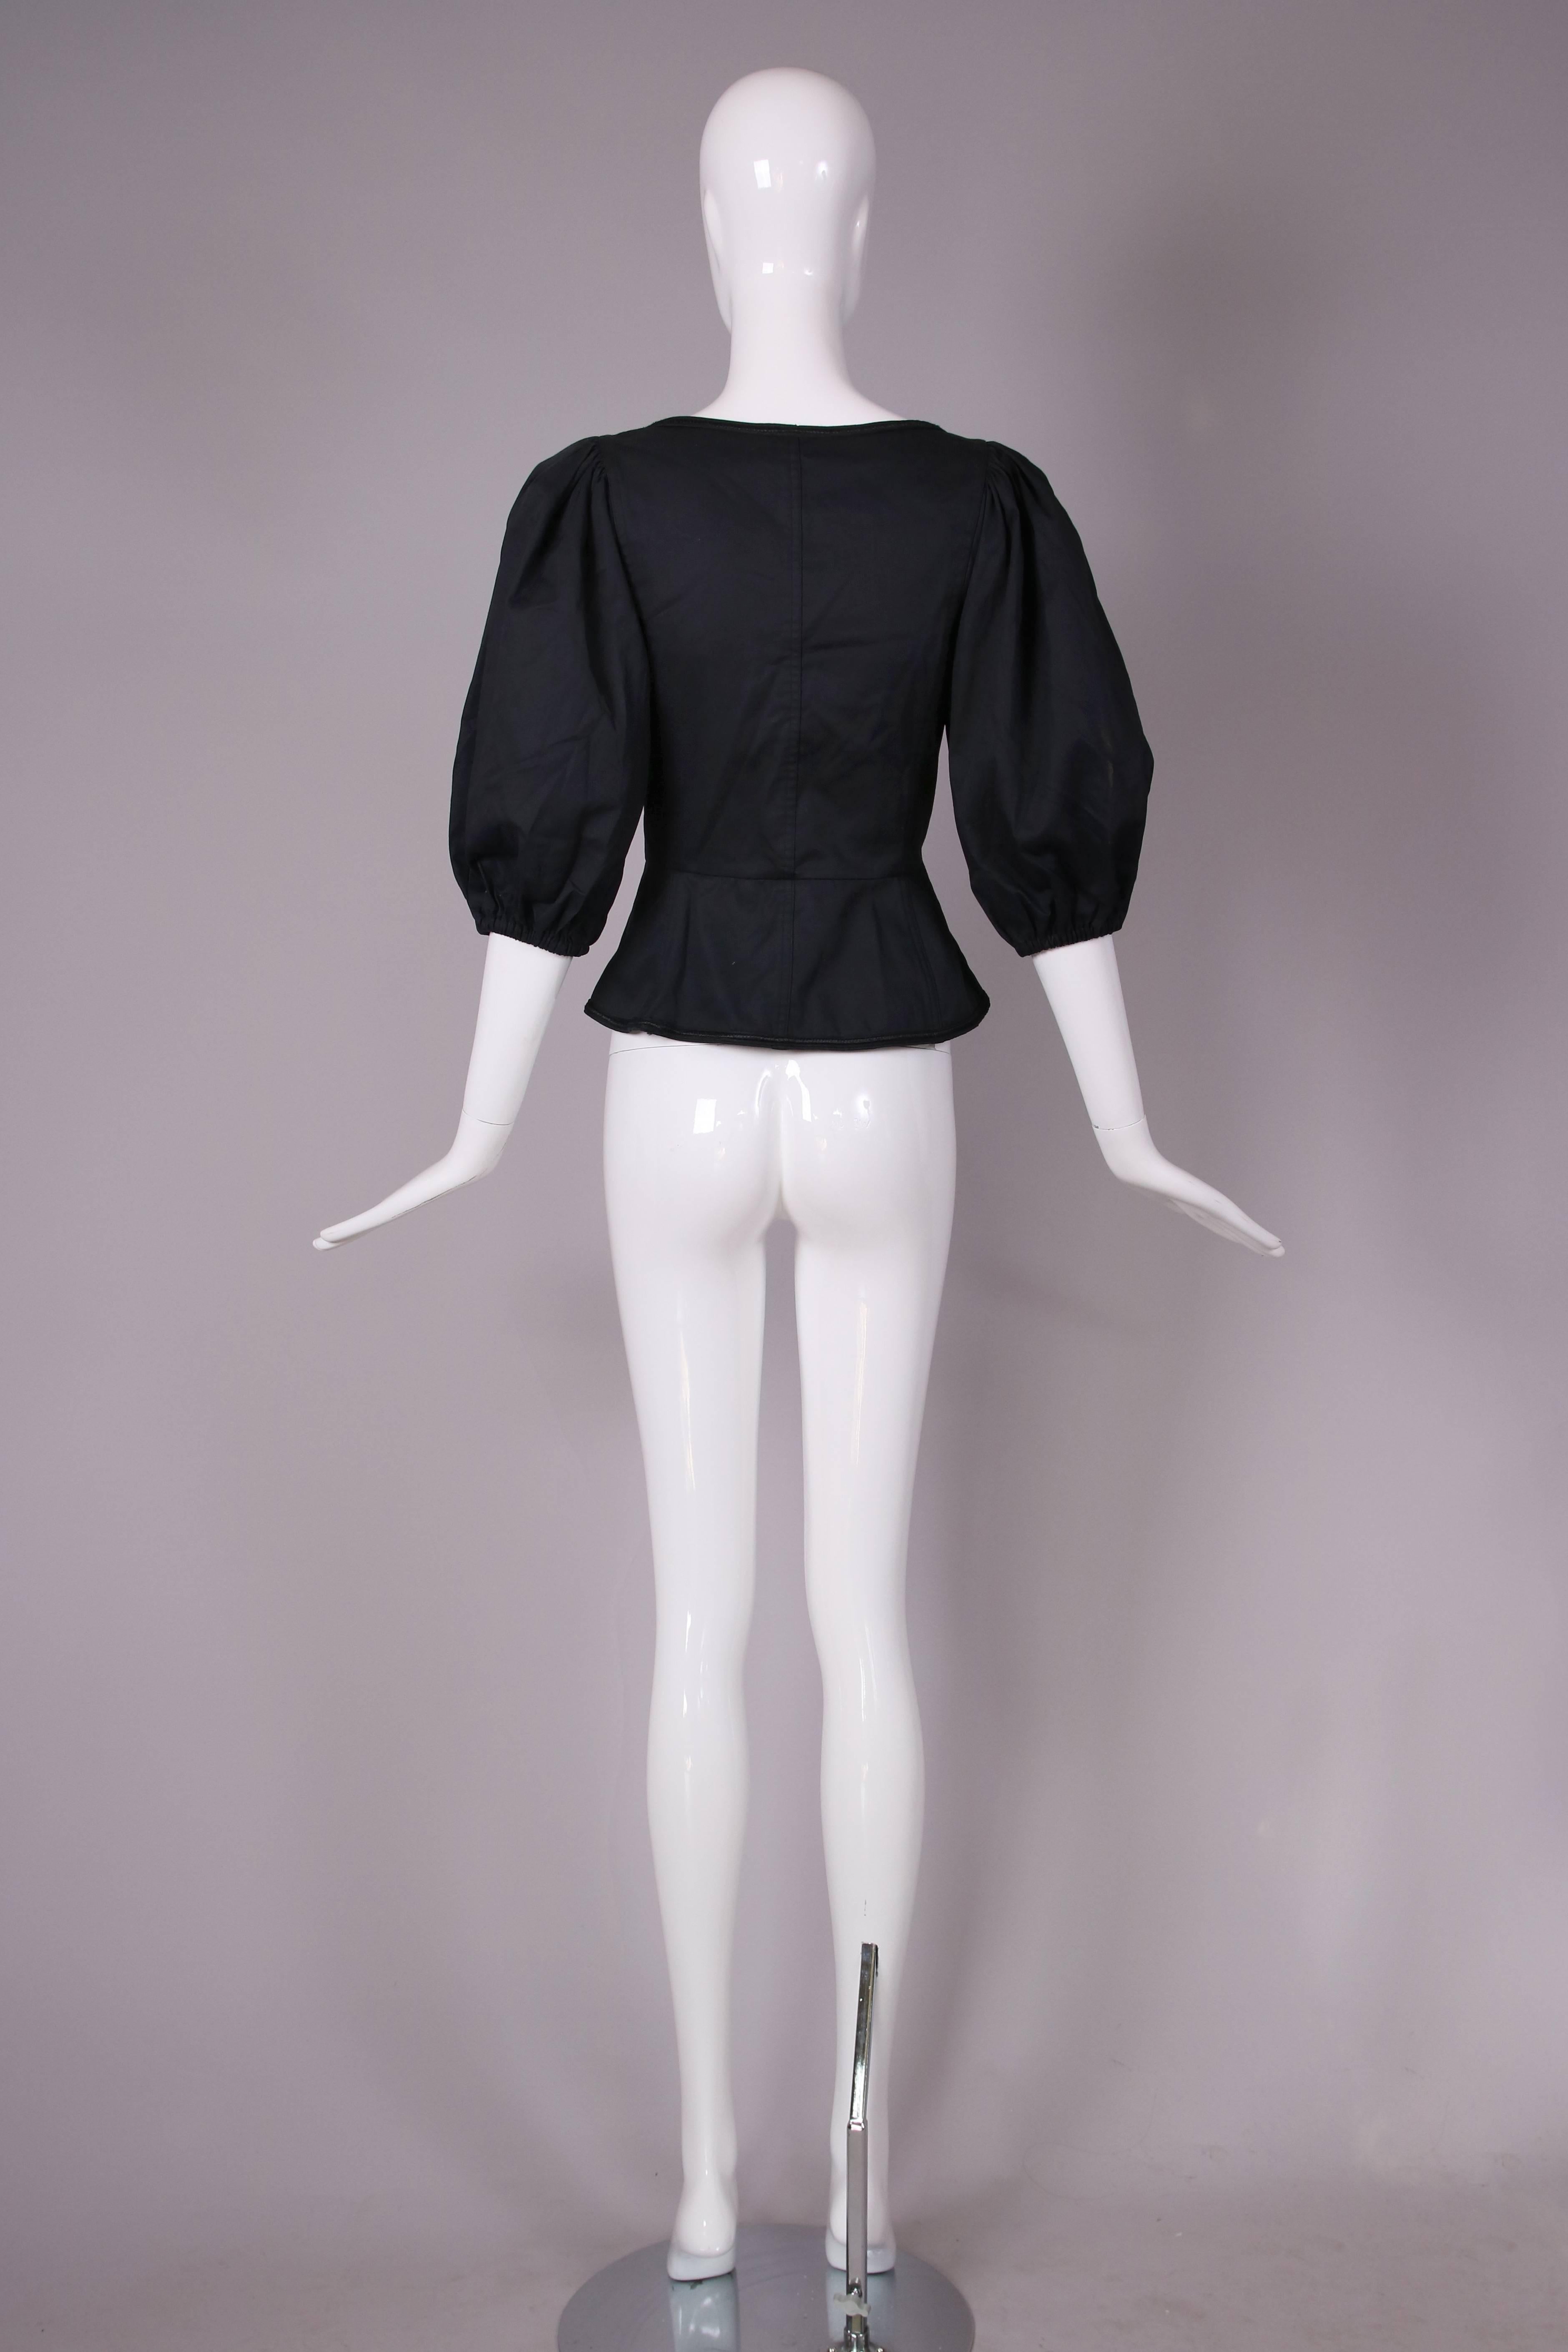 1970's Yves Saint Laurent Black Cotton Lace Up Peasant Top w/Balloon Sleeves 2